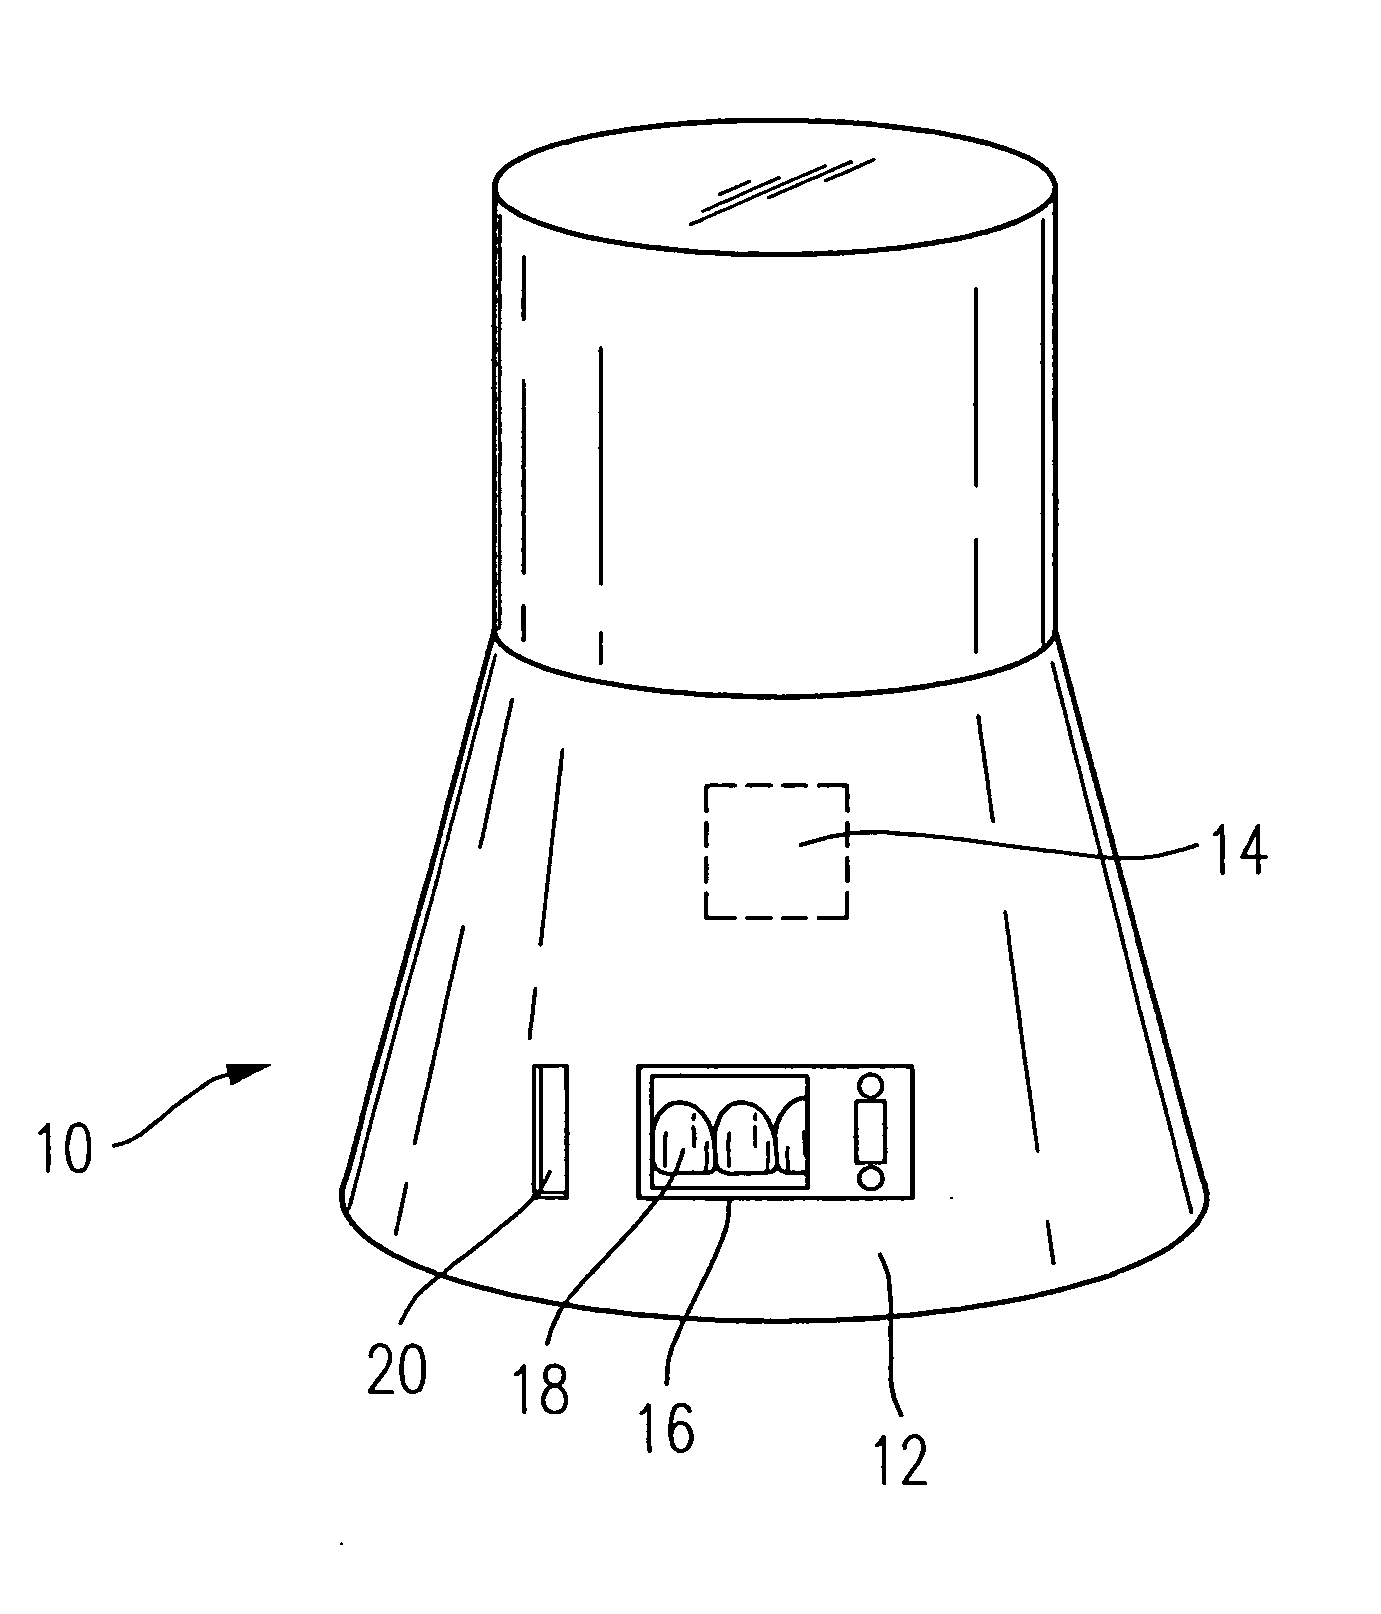 Method and apparatus for using a display associated with a dental kiln